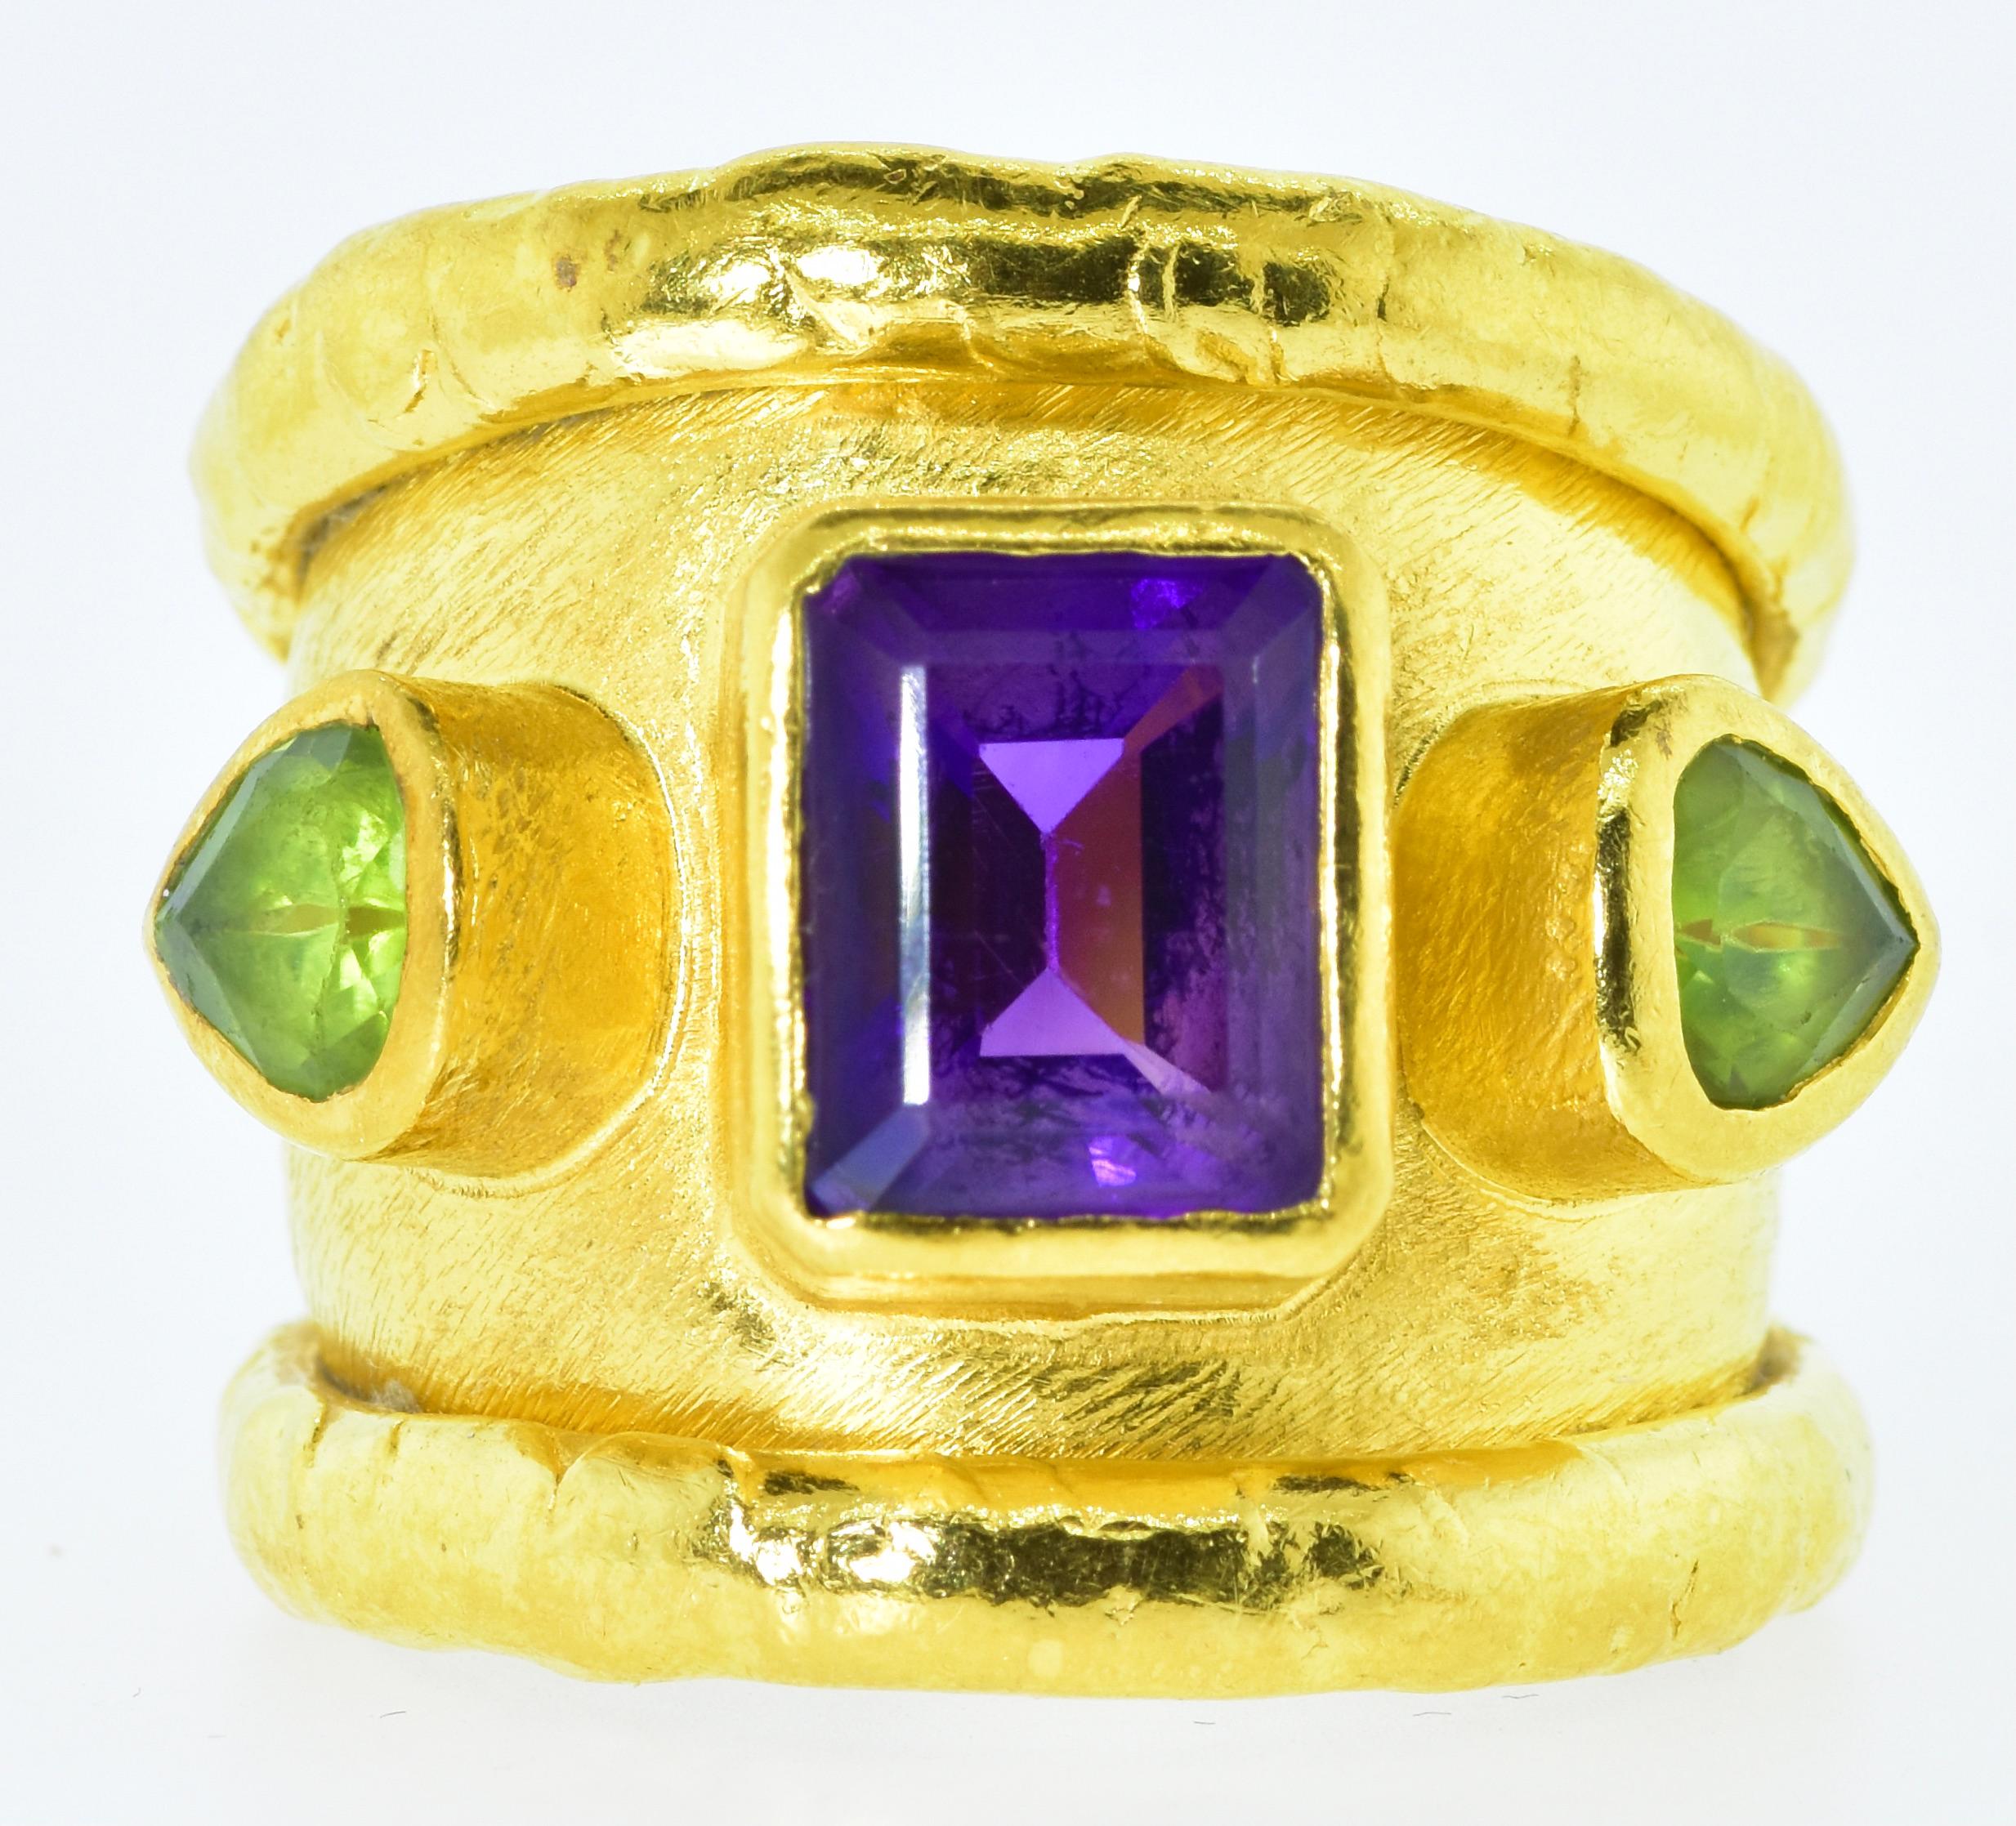 Jean Mahie 22K gold ring centering a fine emerald cut amethyst and two pear cut peridots.  This ring is signed with the JM signature for the atelier Jean Mahie in Paris.  This is a large ring with hand hammered 22K gold.   This ring can be sized as